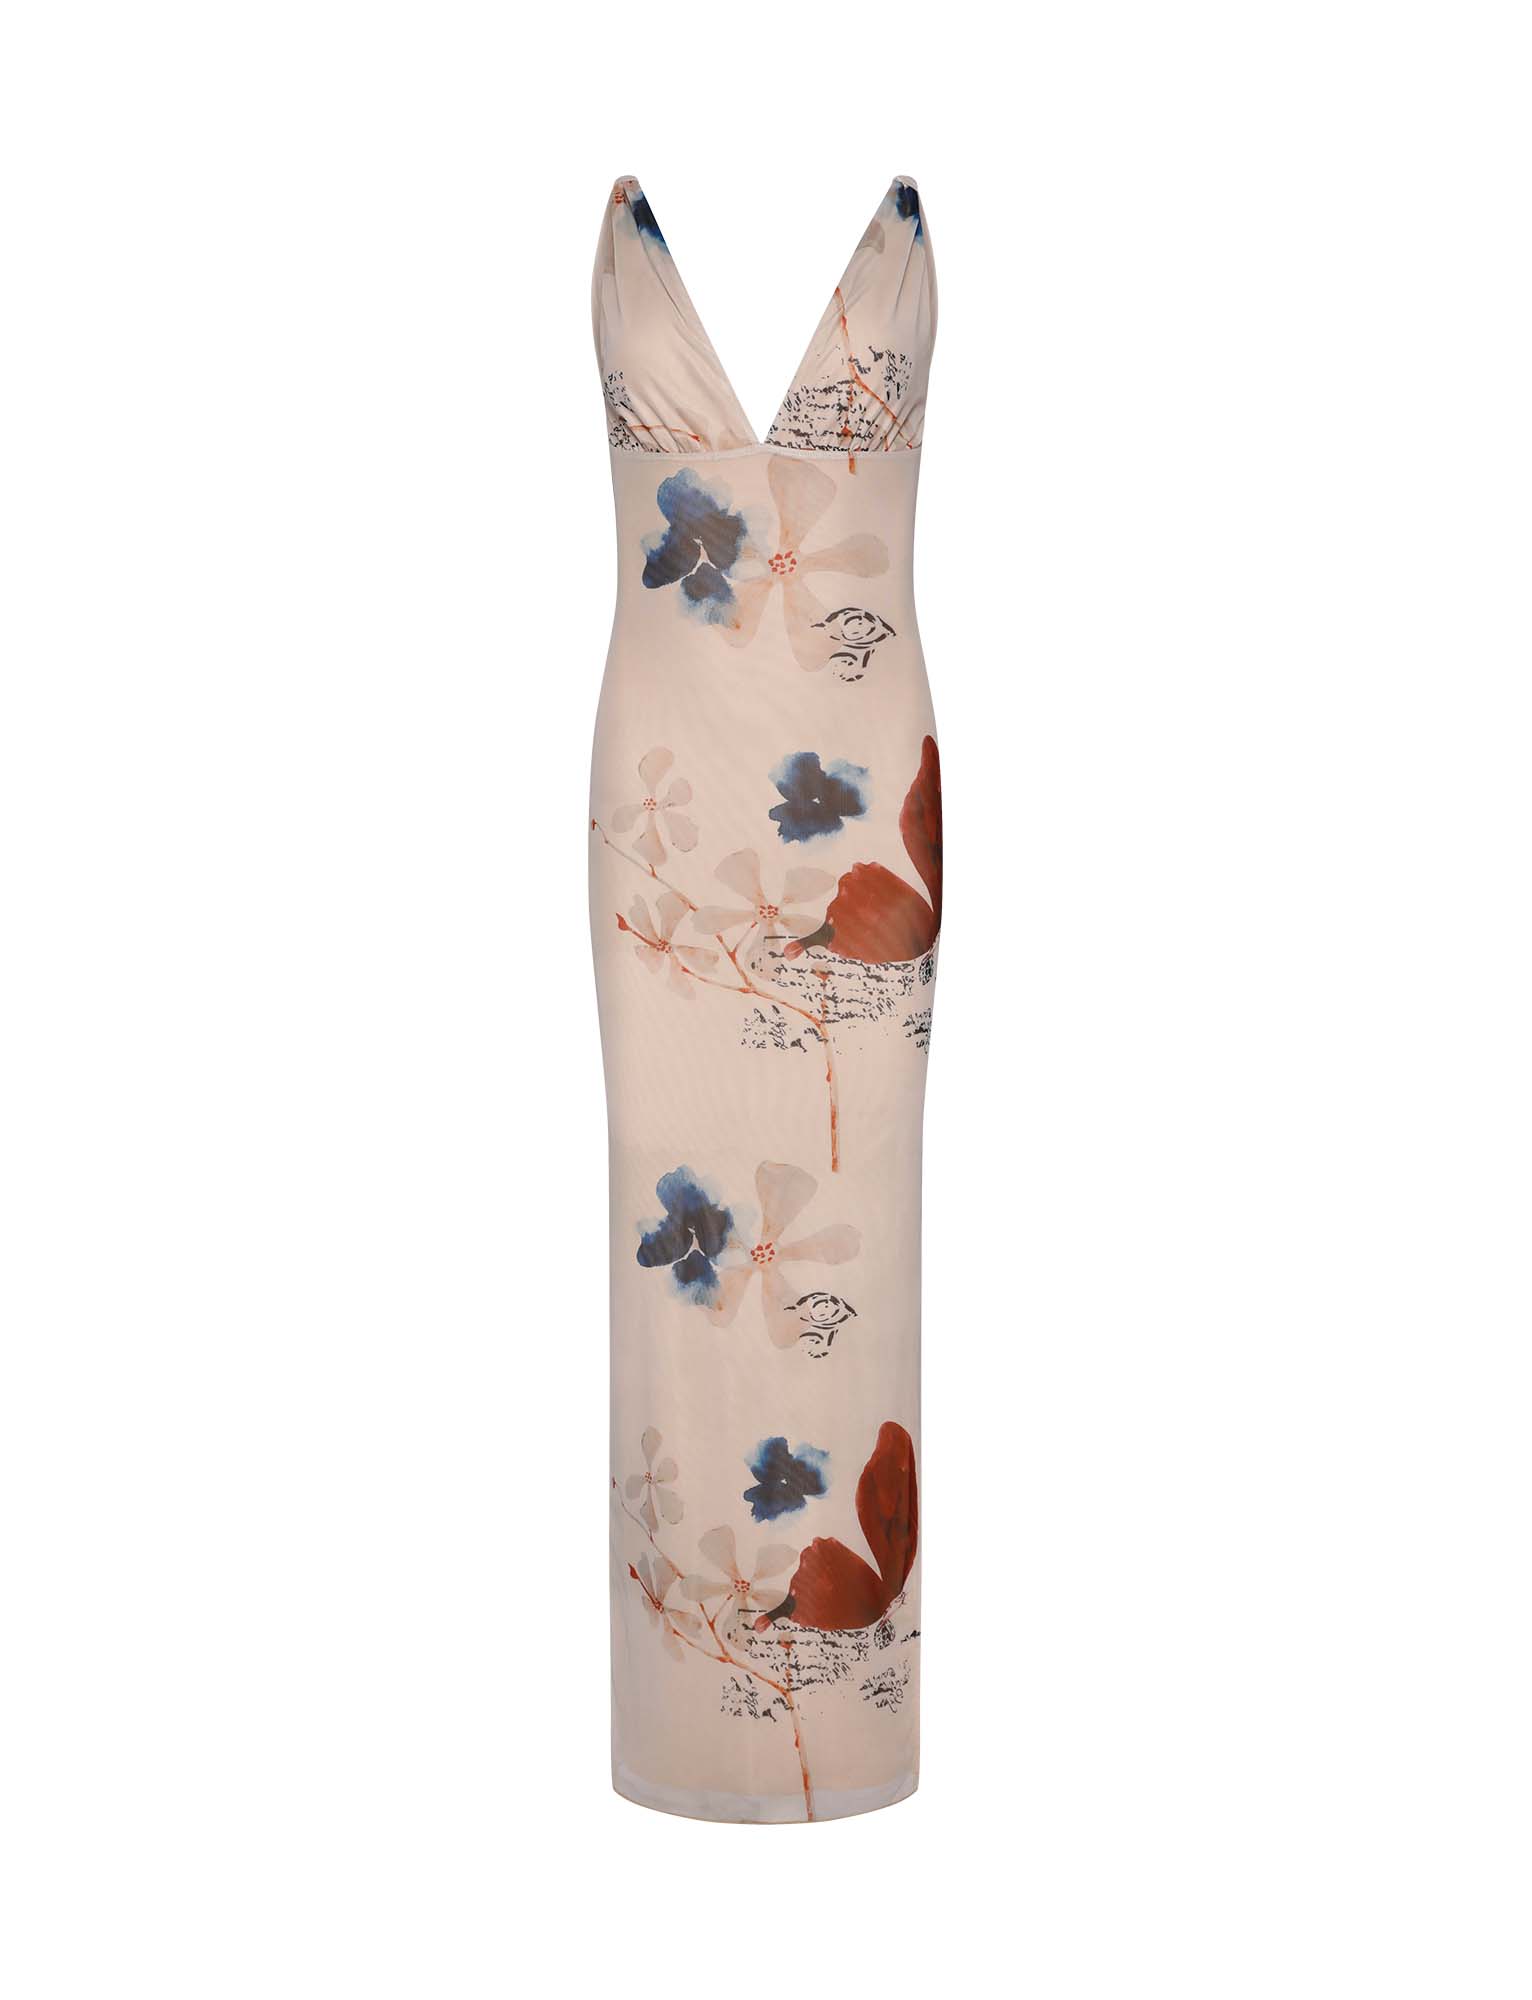 PERCY MAXI DRESS - NEUTRAL : PAISLEY : BY POPPY BUTTERFLY